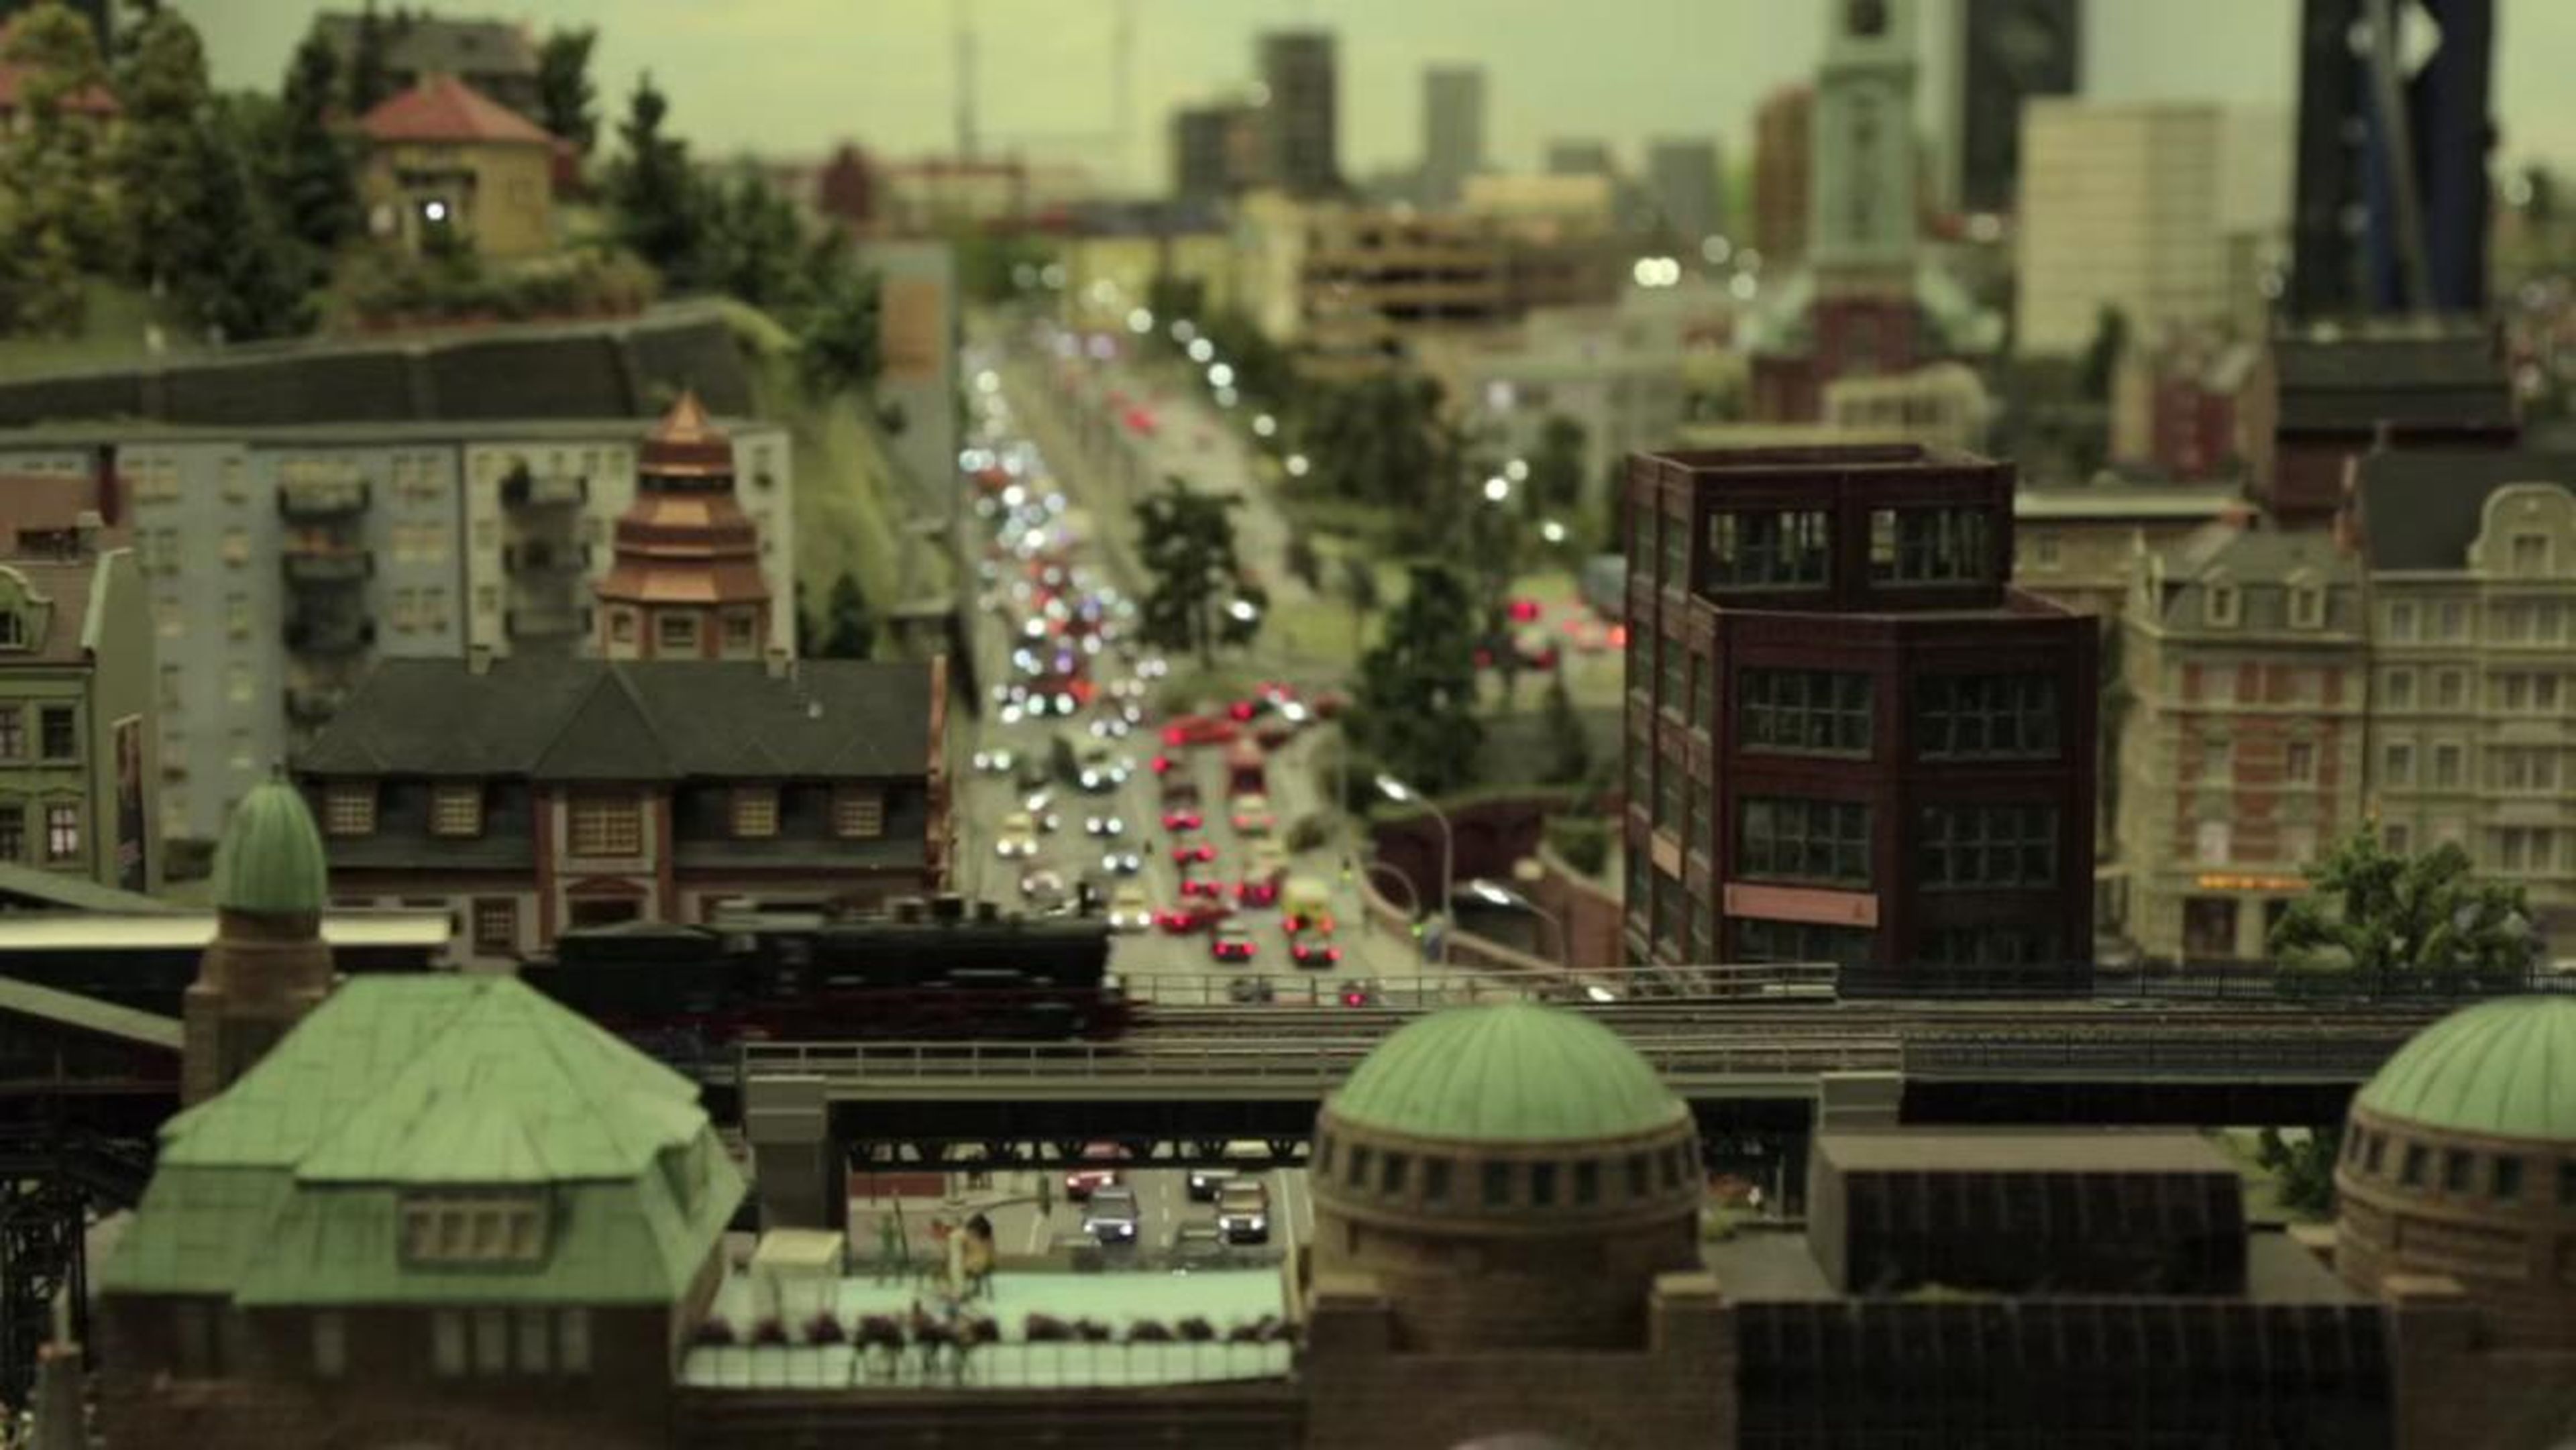 Since Hamburg is the actual city that houses the Miniatur Wunderland, the creators went out of their way to bring rich detail to the model replica.